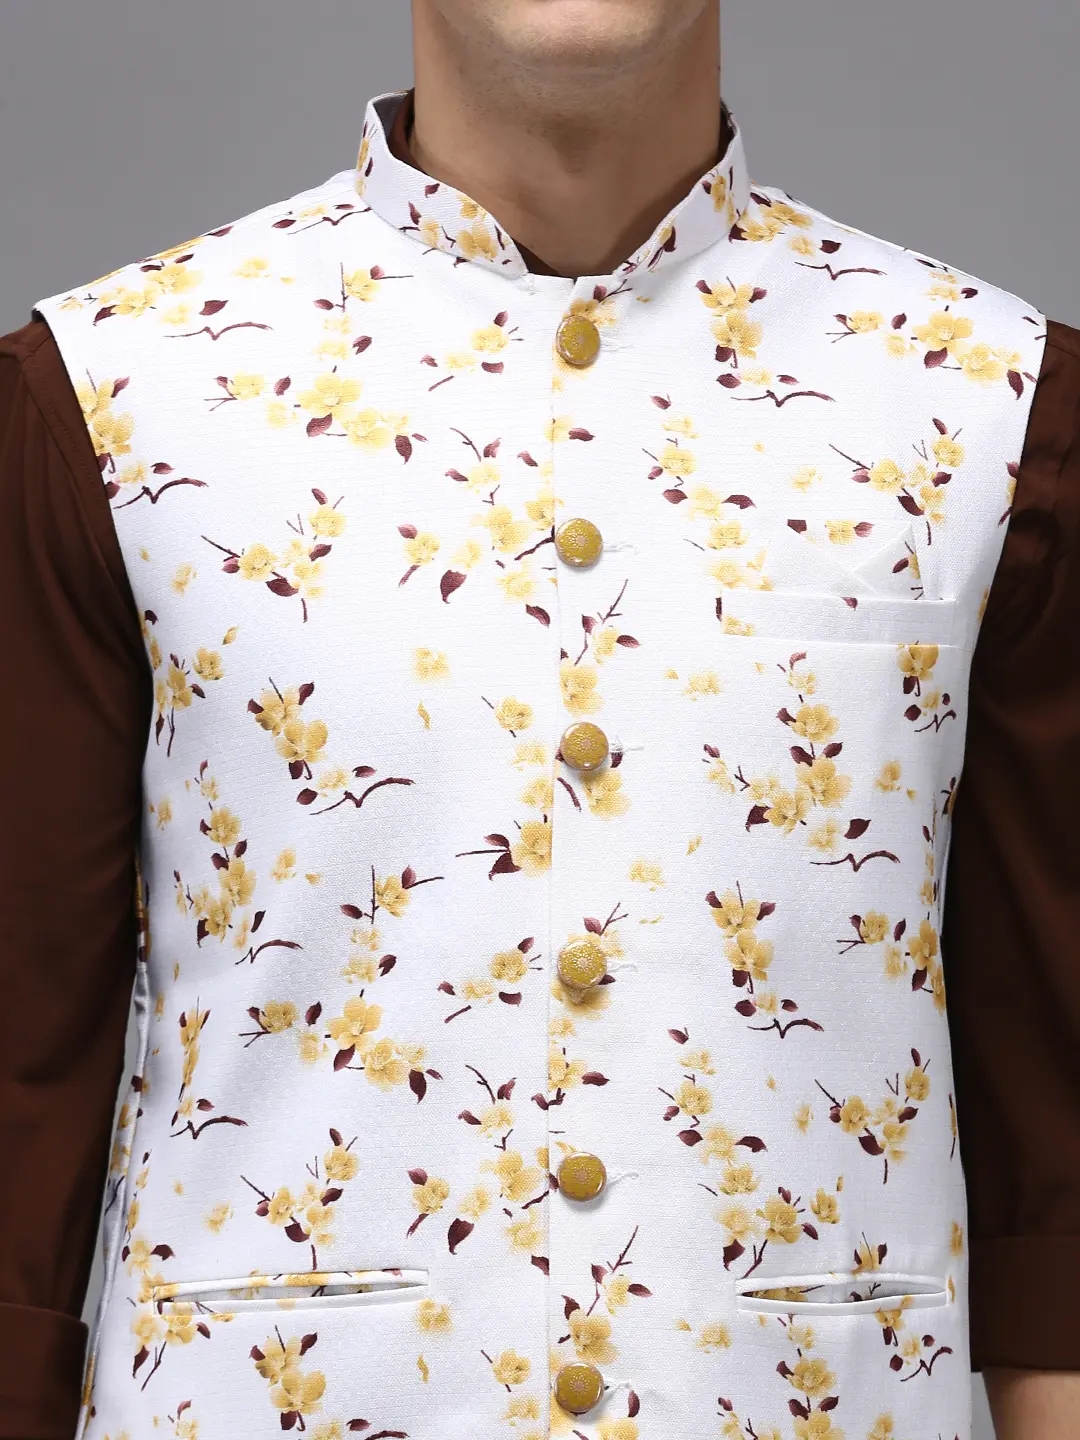 Men's White Cotton Blend Printed Comfort Fit Ethnic Jackets